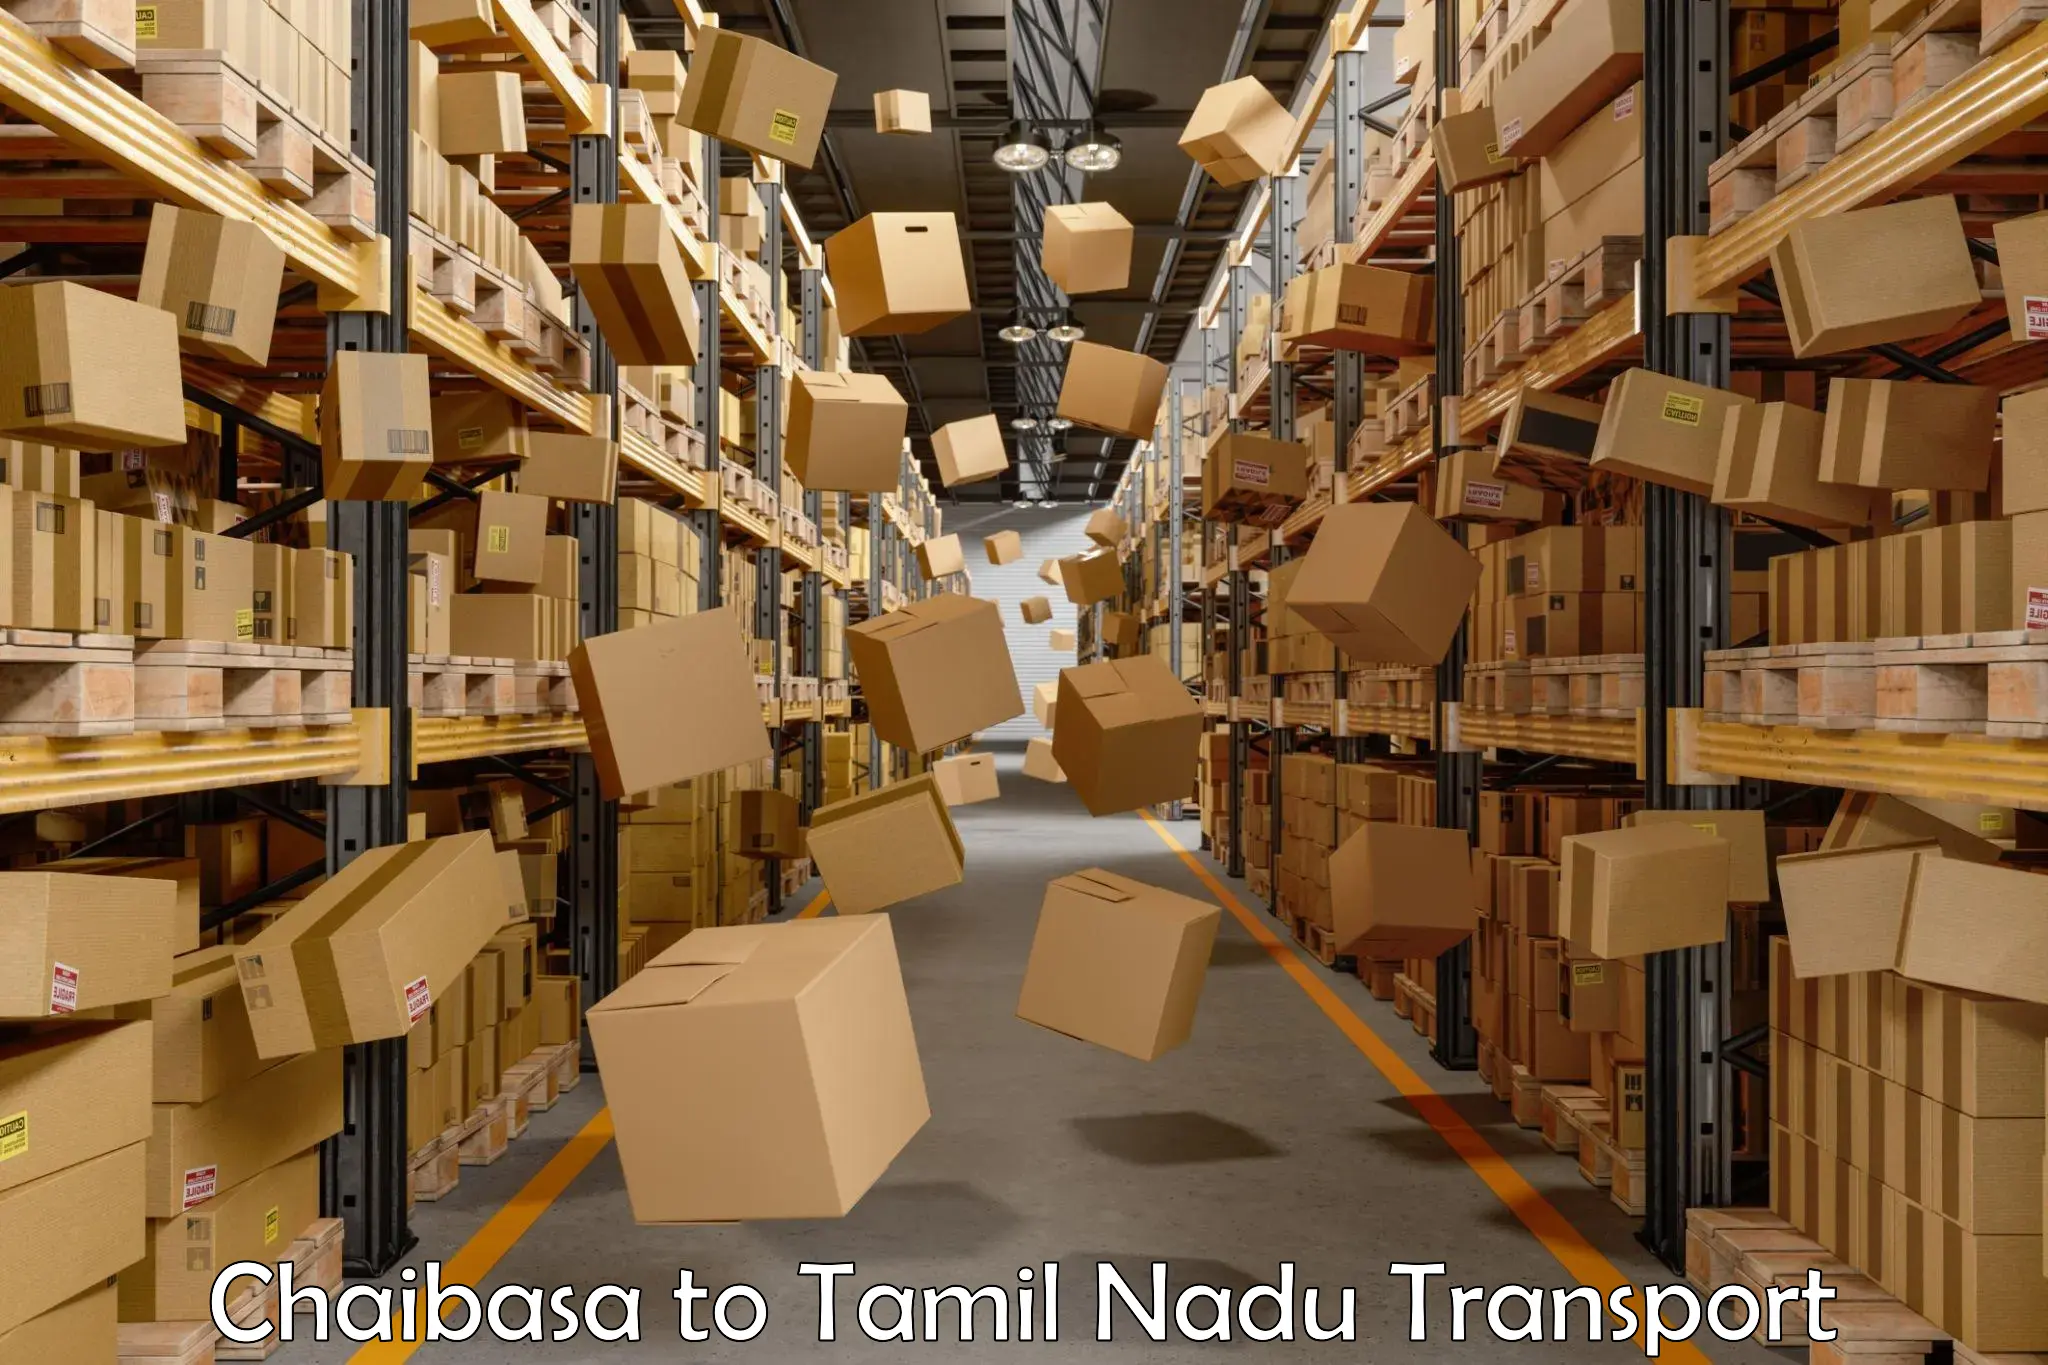 Truck transport companies in India Chaibasa to Tamil Nadu